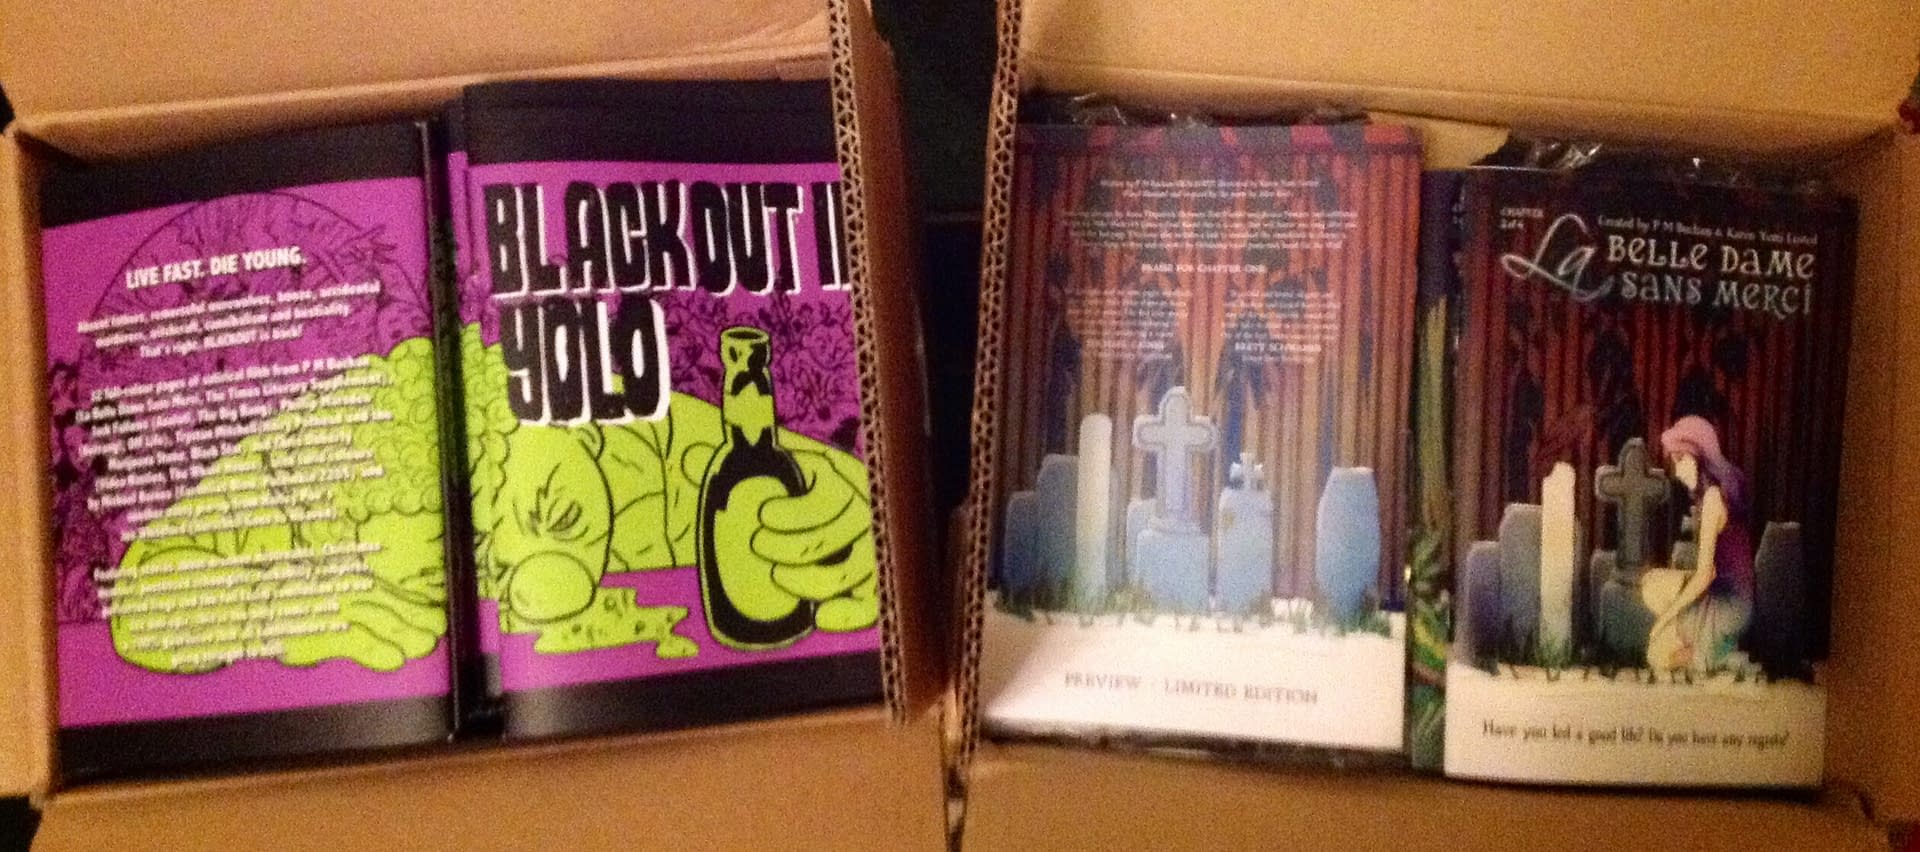 BLACKOUT II and LBDSM 2 ready to sell at Thought Bubble